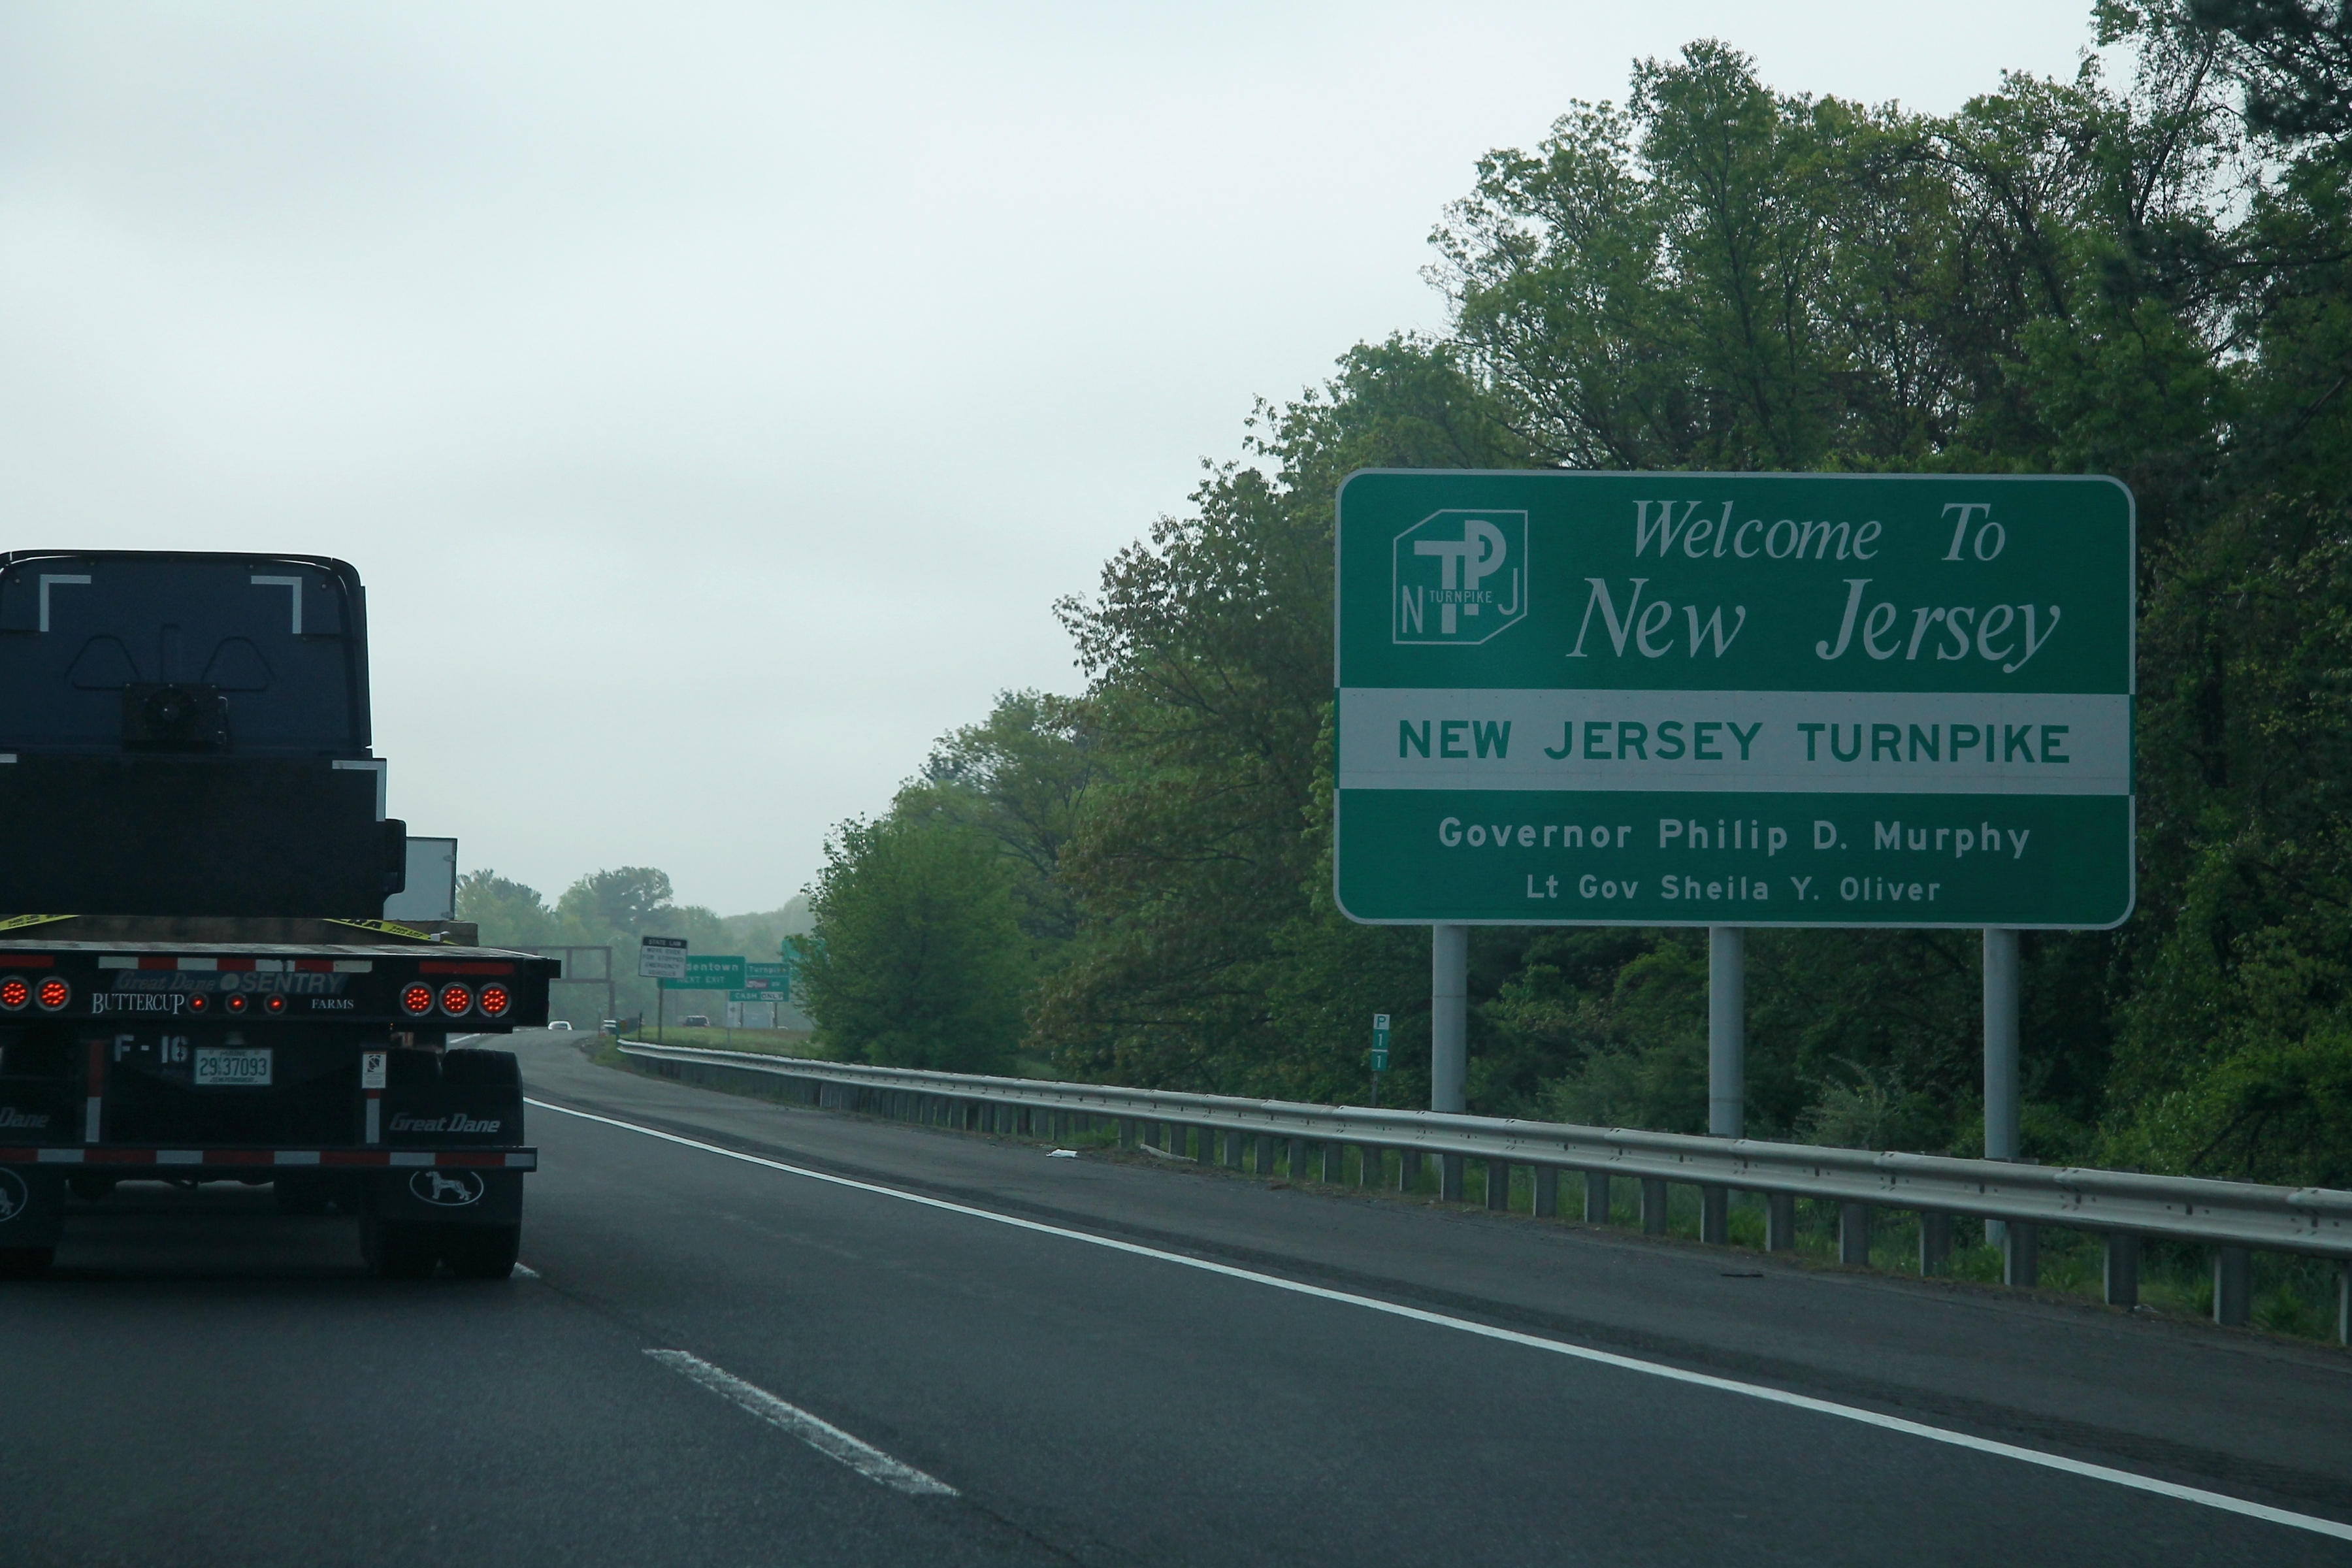 Welcome to New Jersey